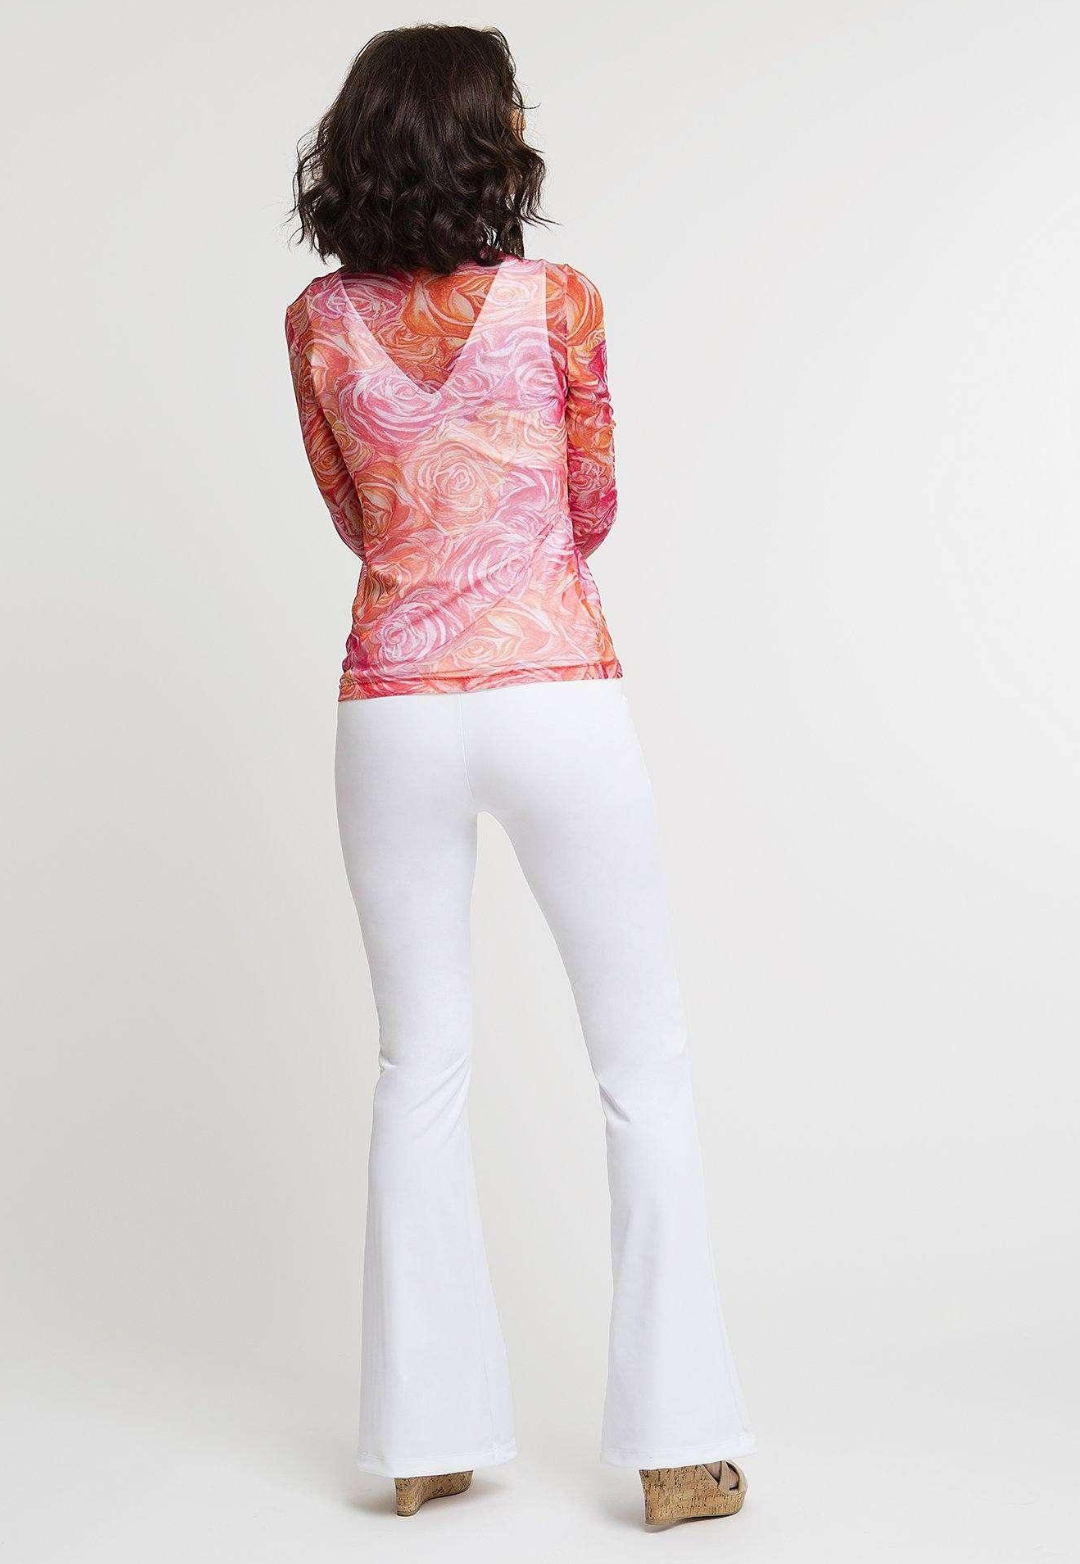 Woman wearing mesh pink and orange flower printed shirt over stretch knit white v neck tank top and pants by Ala von Auersperg